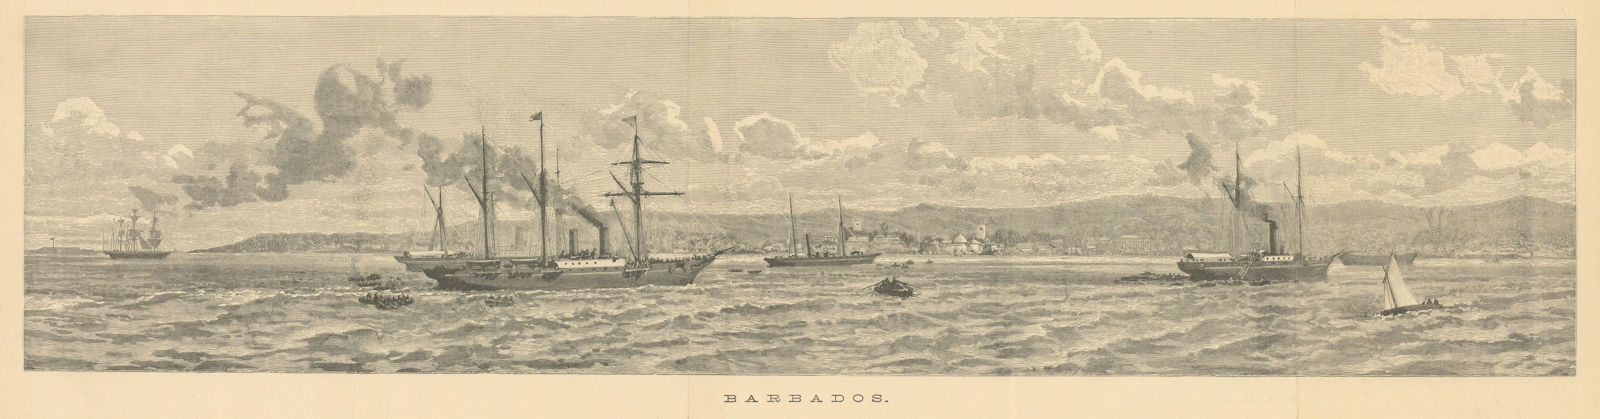 Associate Product Barbados. Panorama of Bridgetown from the sea 1889 old antique print picture